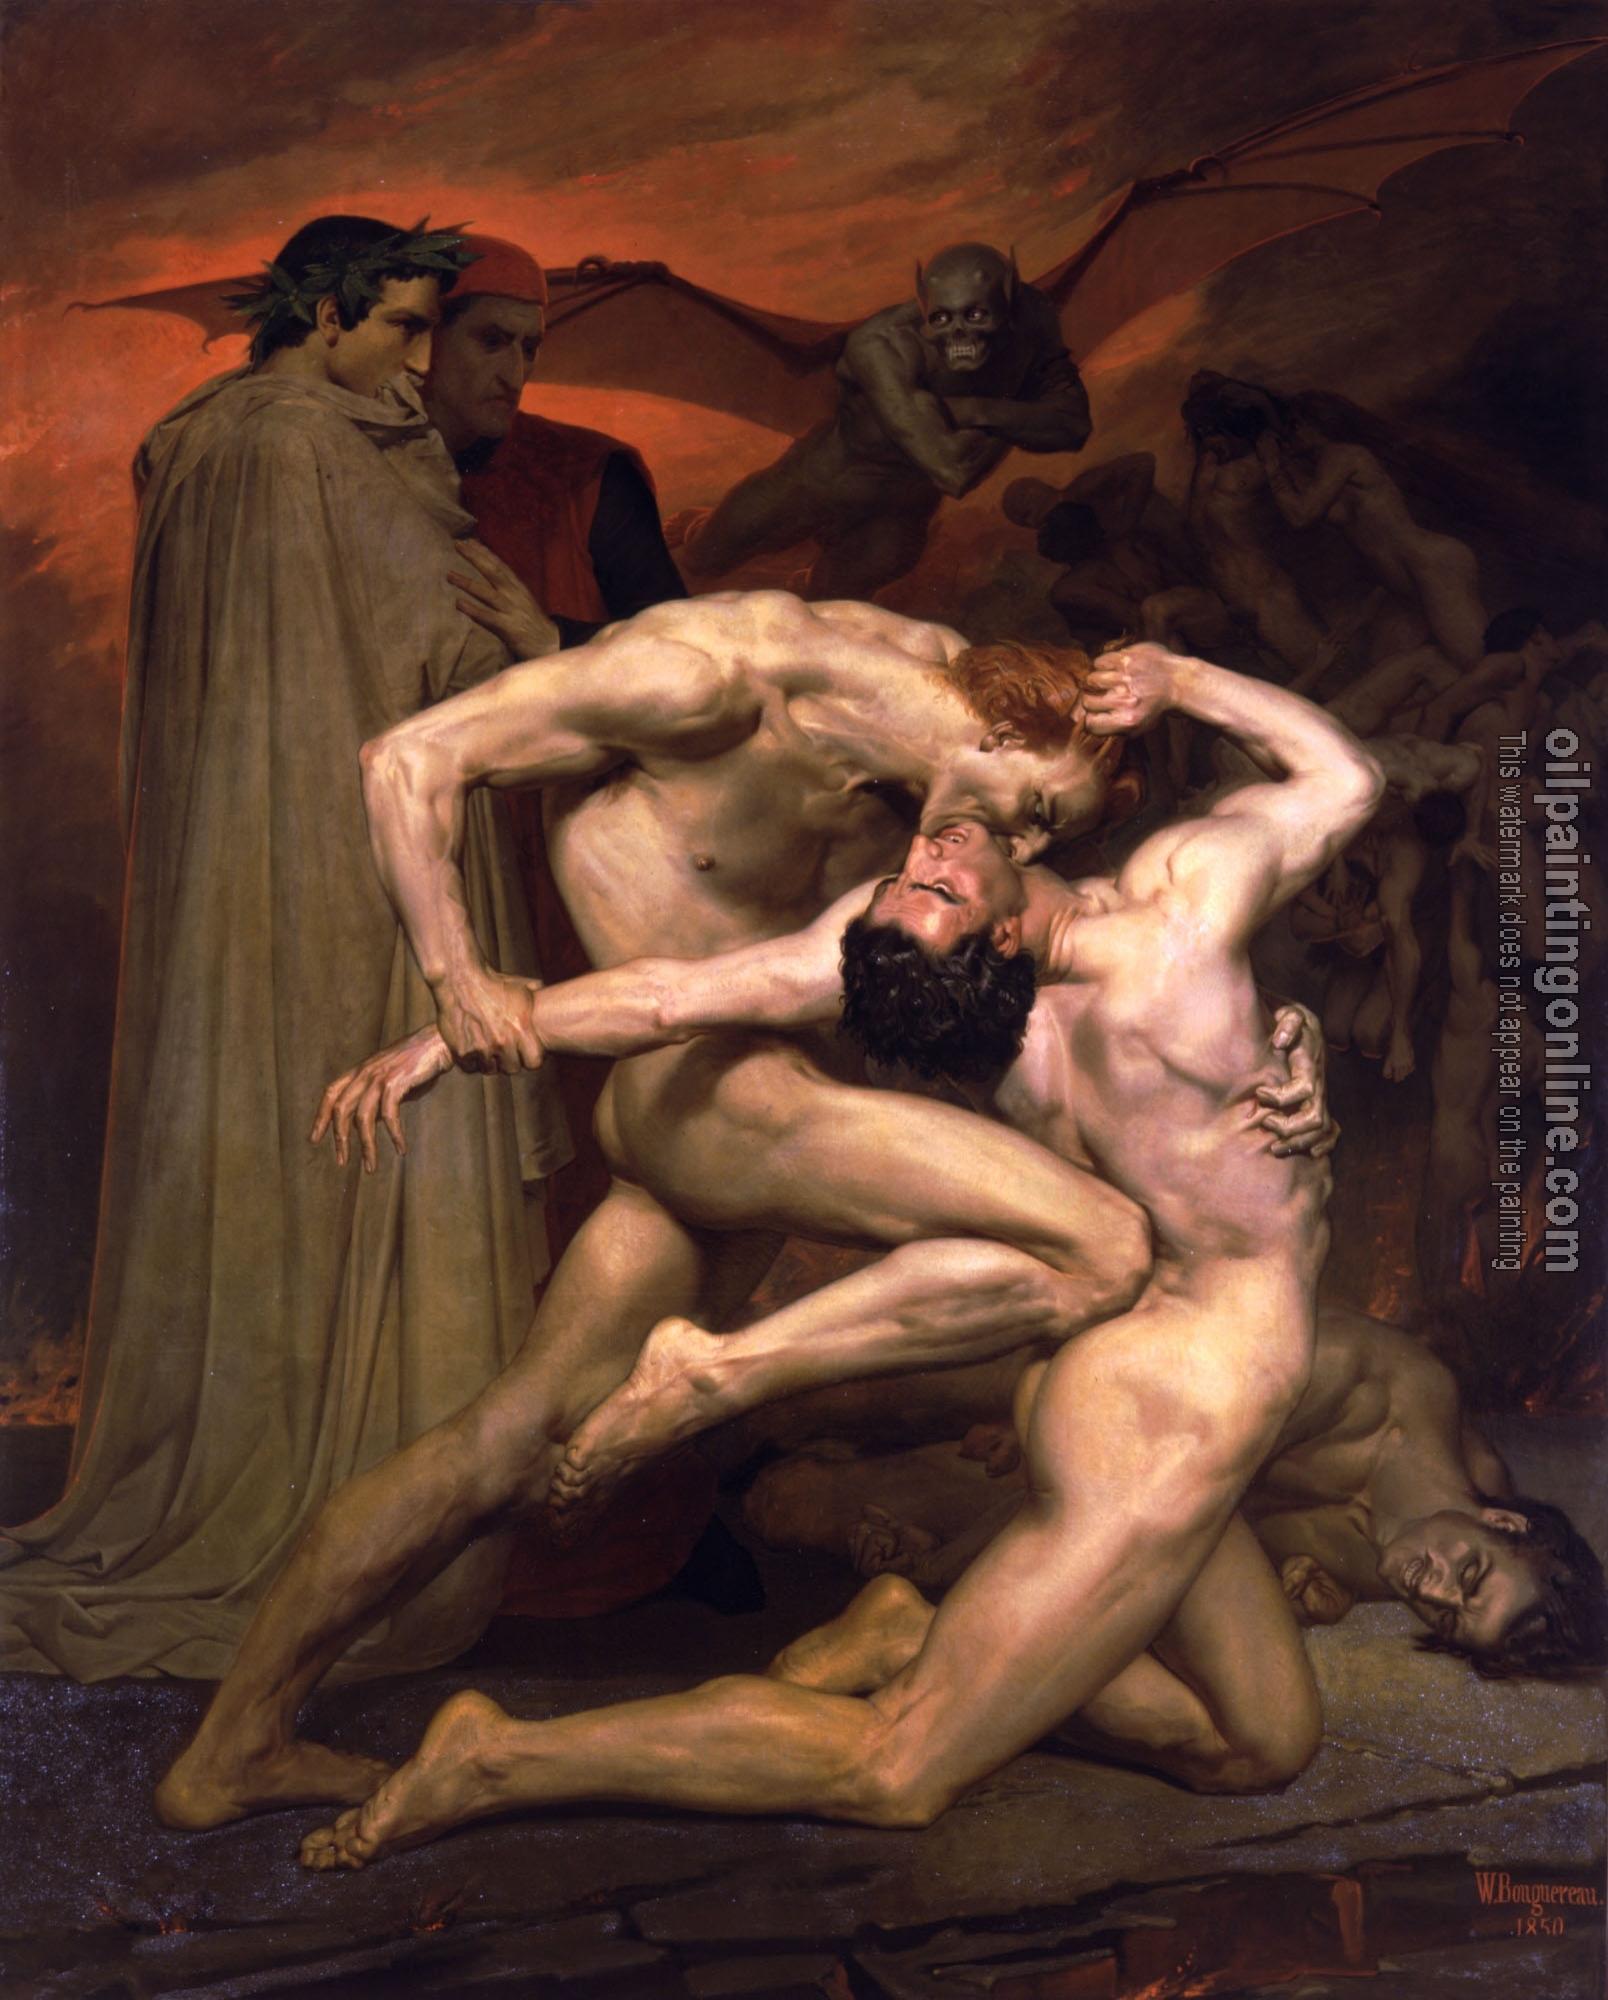 Bouguereau, William-Adolphe - Dante and Virgil in Hell